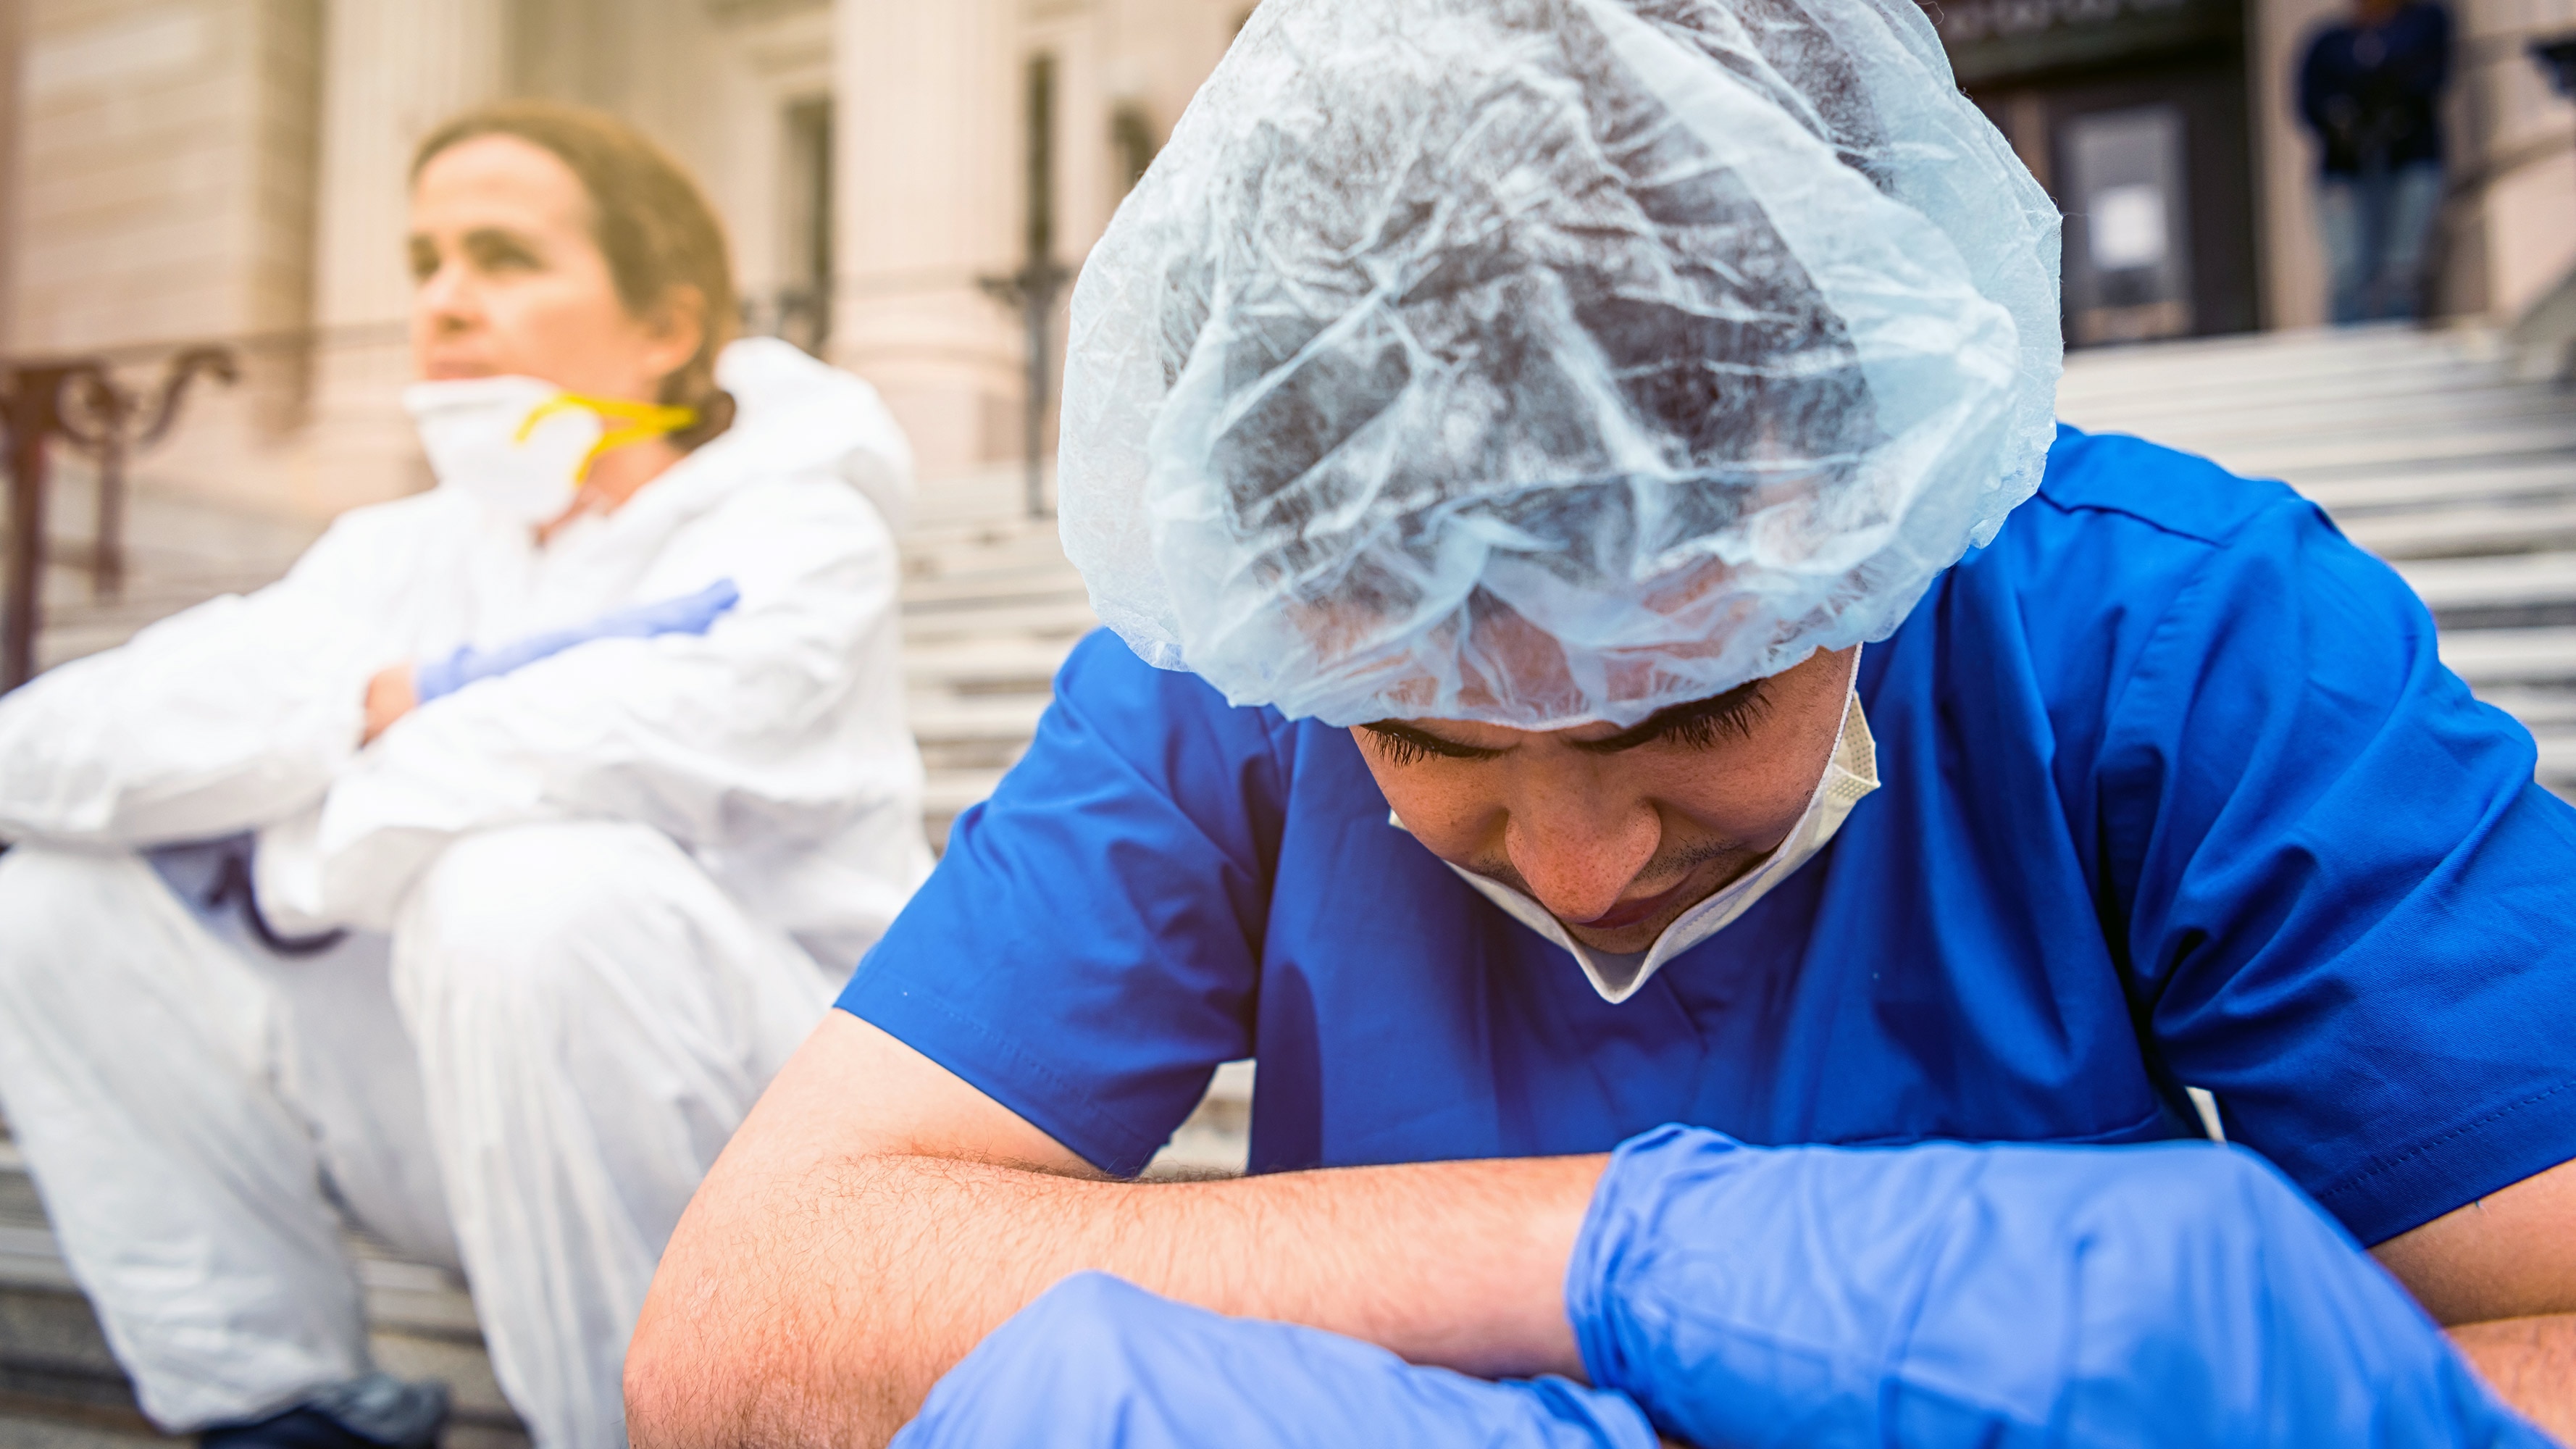 A male doctor, wearing blue scrubs, a face mask, and a hair net, sits on steps outside of a medical facility, looking pensive. A female co-worker sits next to him in the background, looking into the distance.